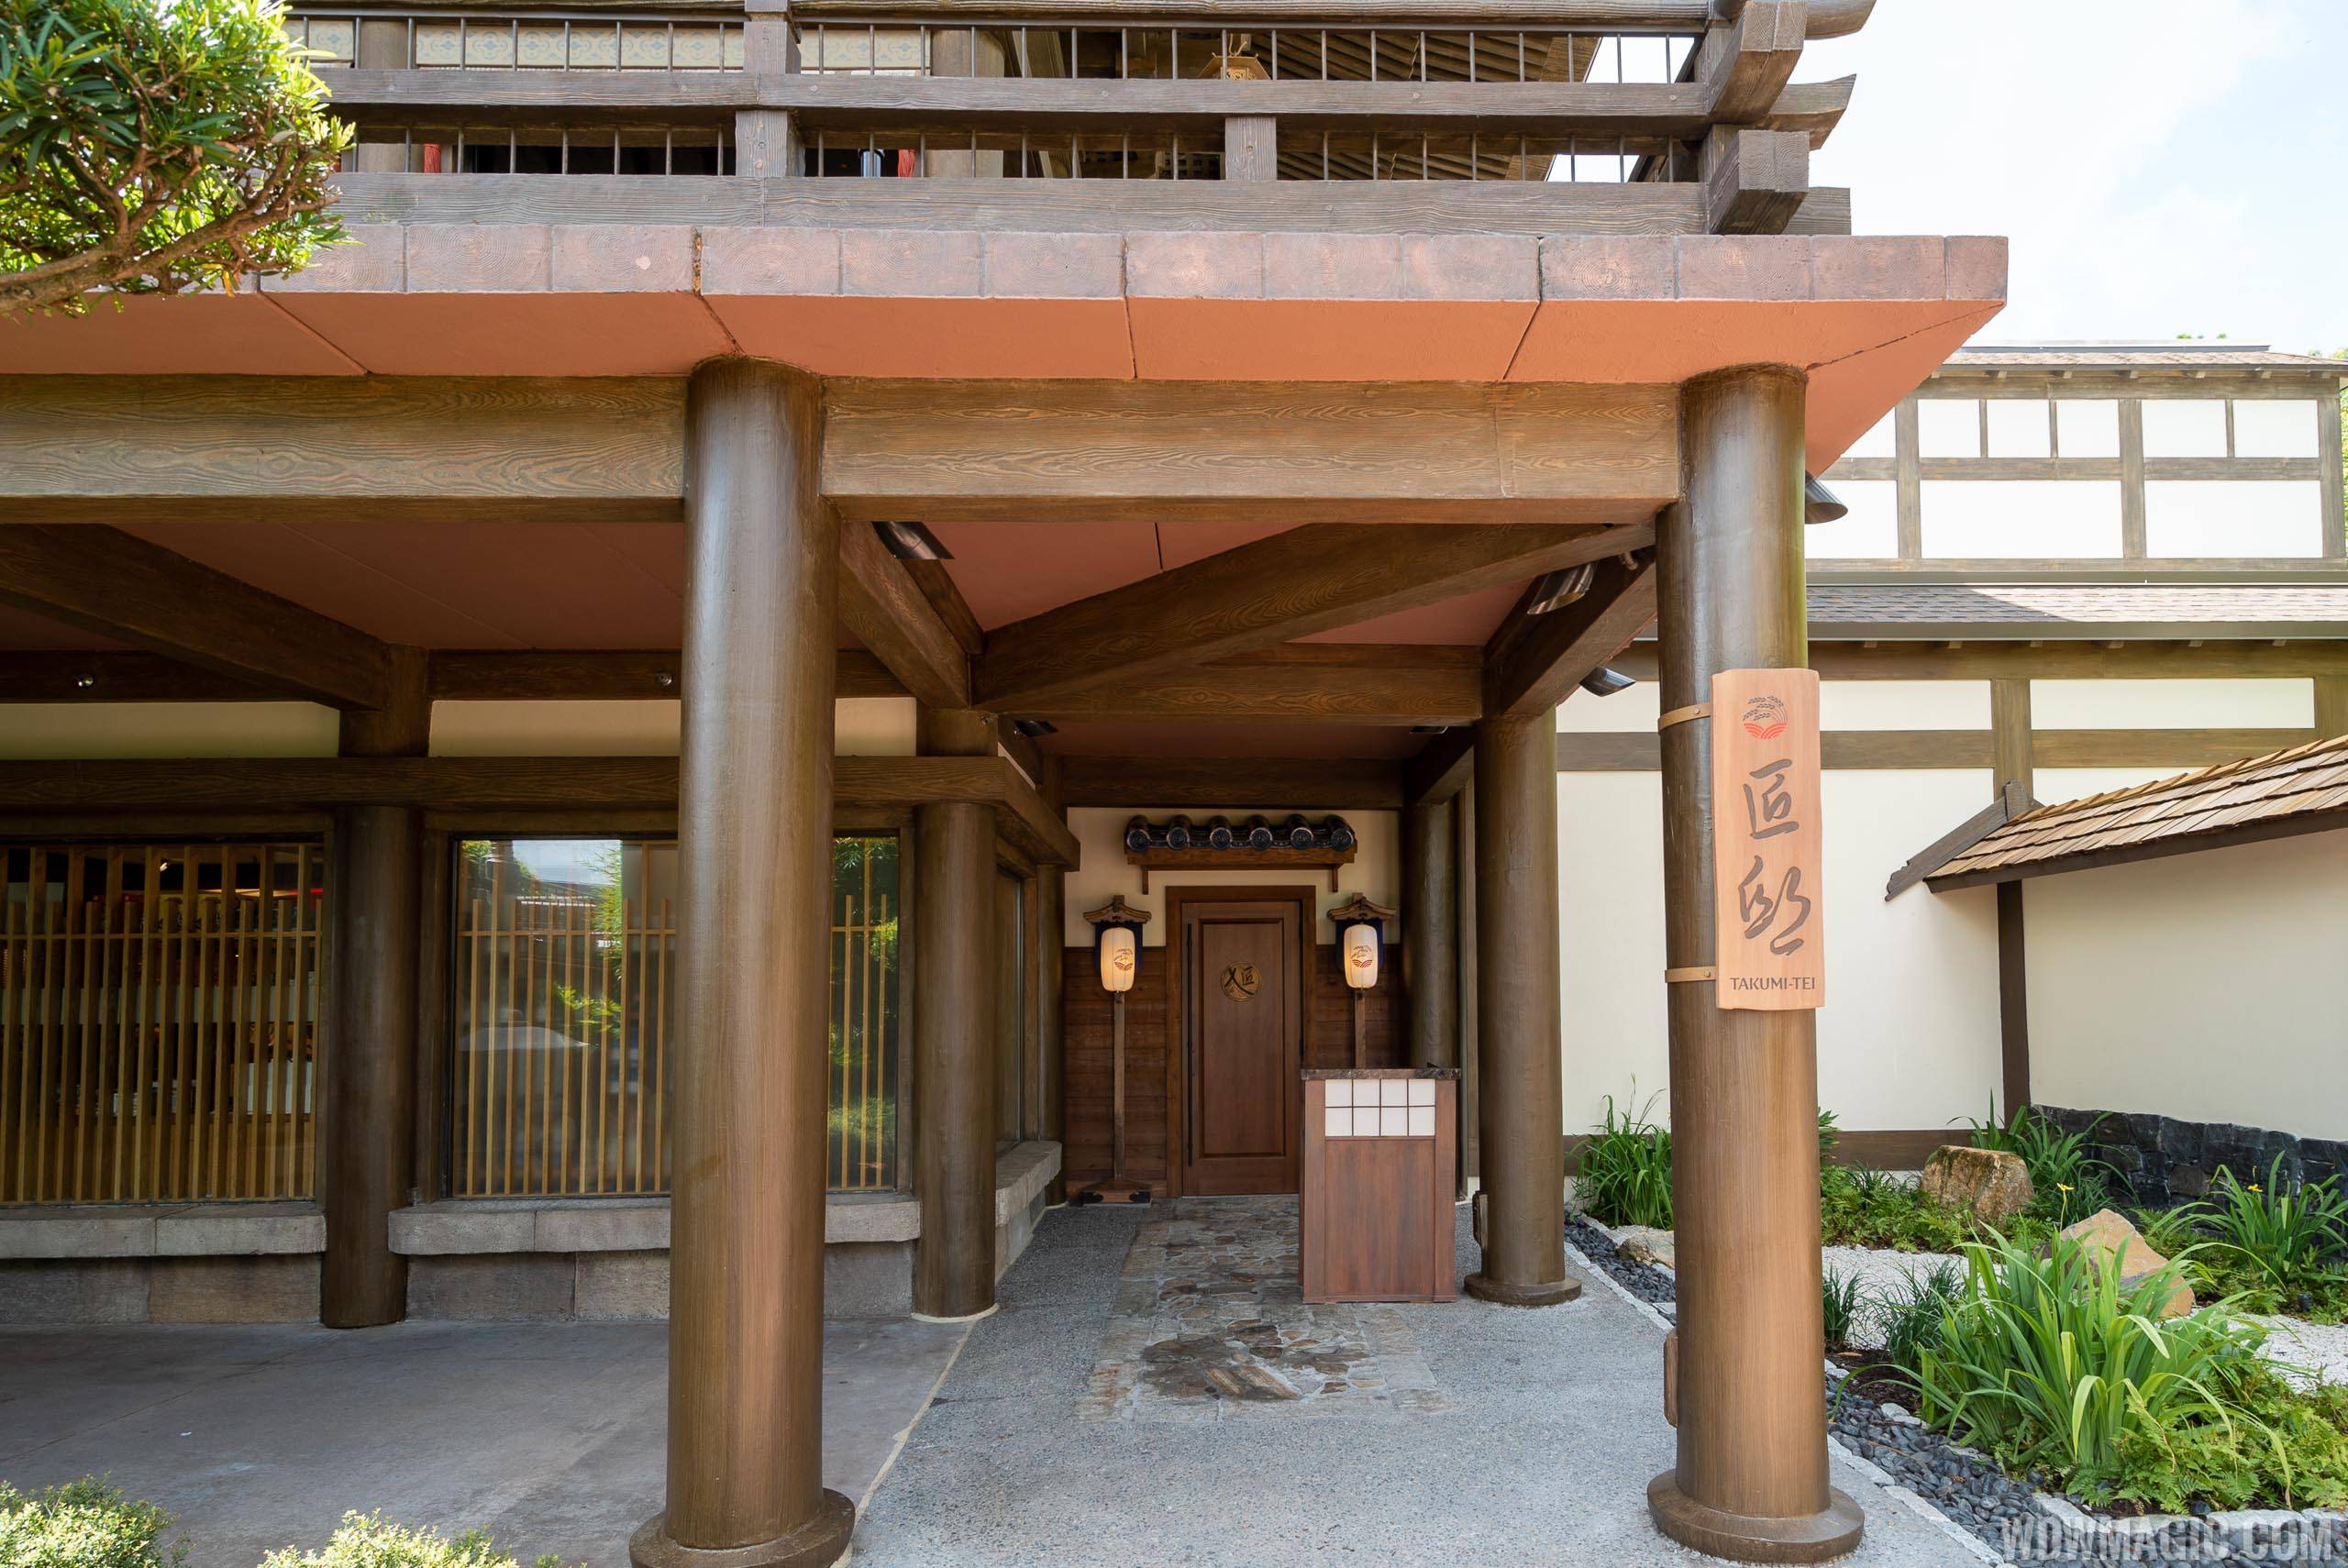 Takumi-Tei restaurant will reopen with new menu in late November at EPCOT's Japan Pavilion